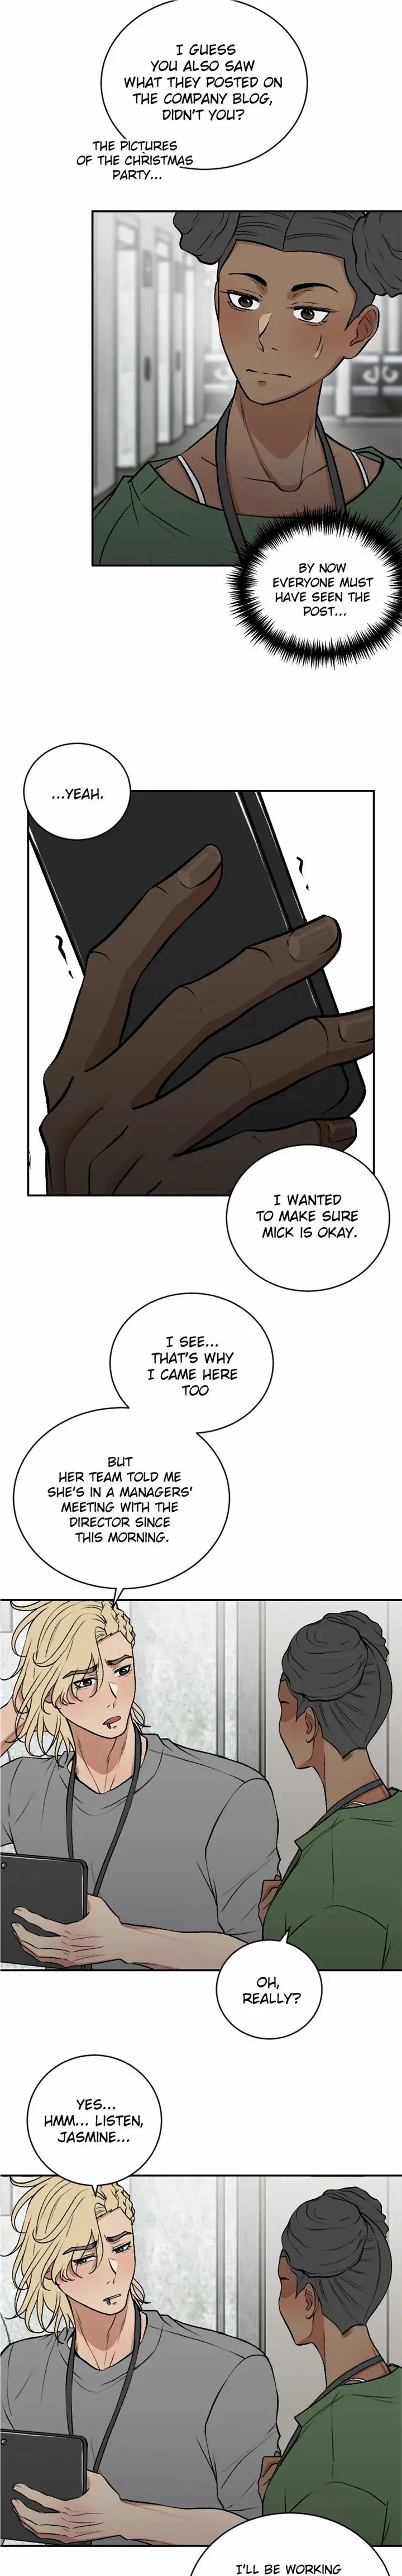 I Hate You, Will You Have Sex With Me? - Page 3